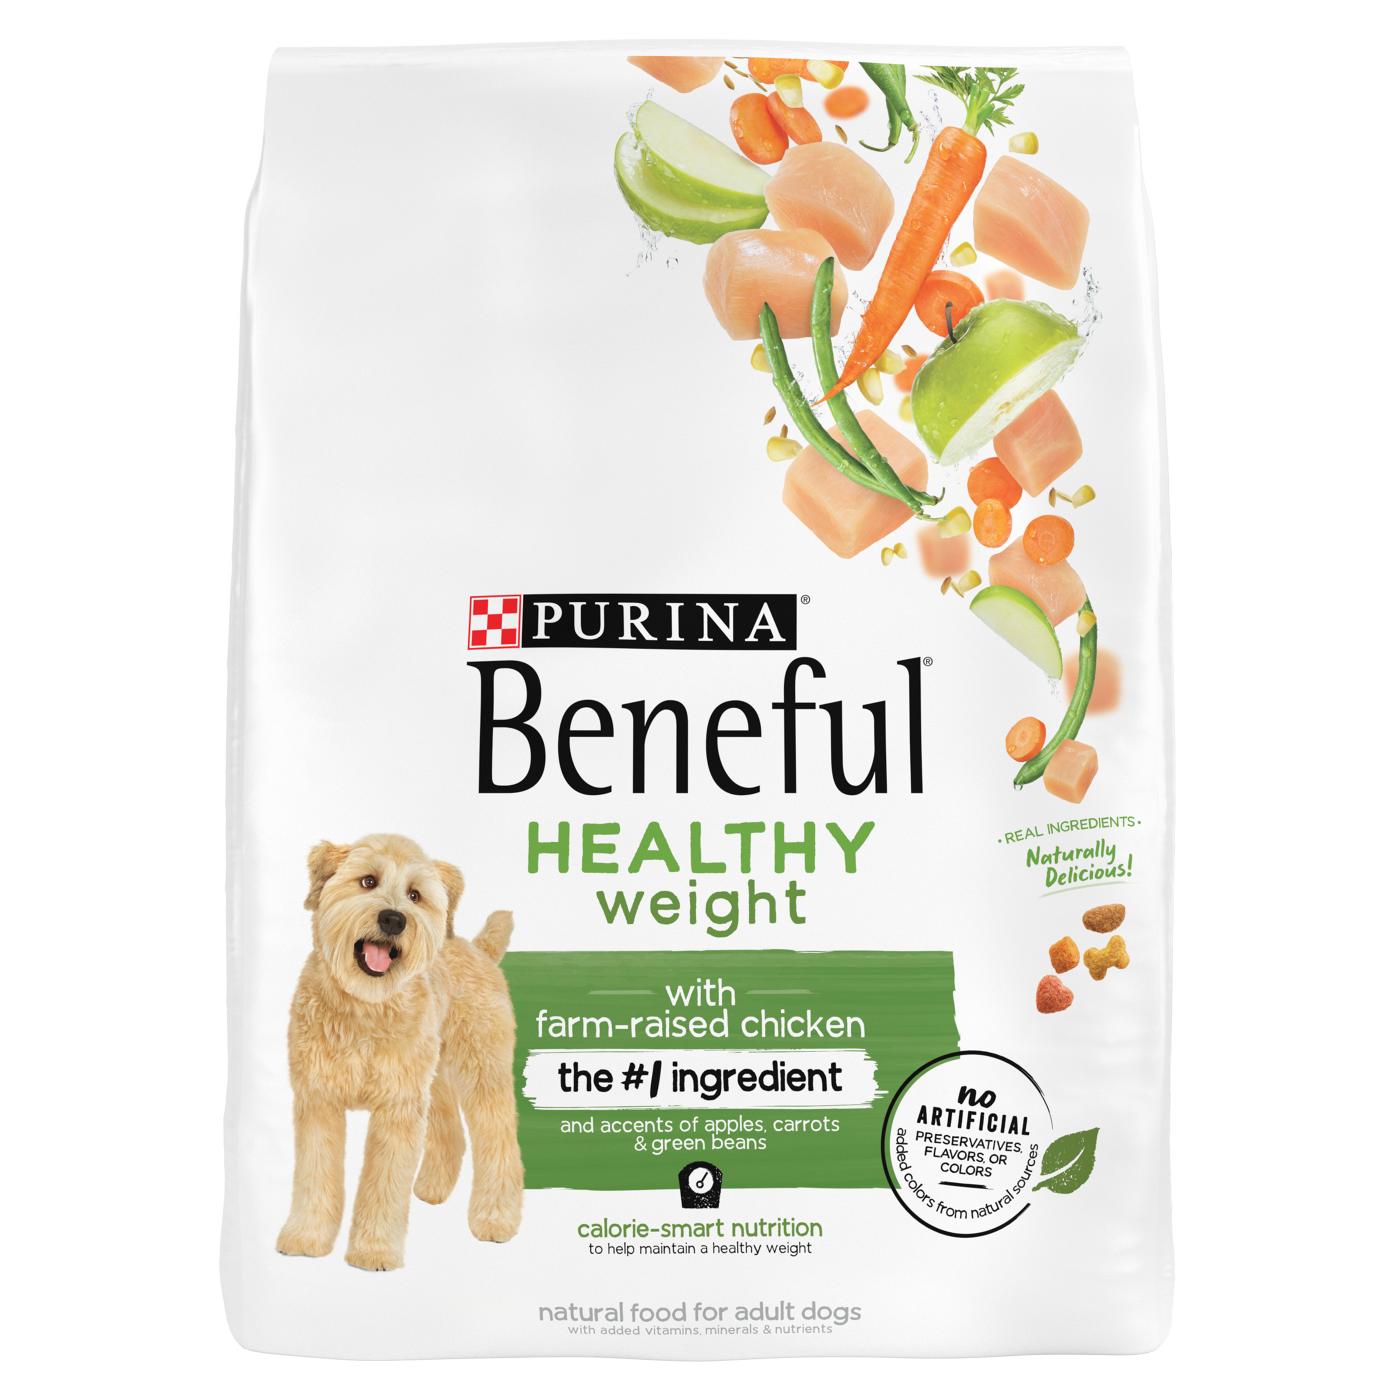 Beneful Purina Beneful Healthy Weight Dry Dog Food With Farm-Raised Chicken; image 1 of 6